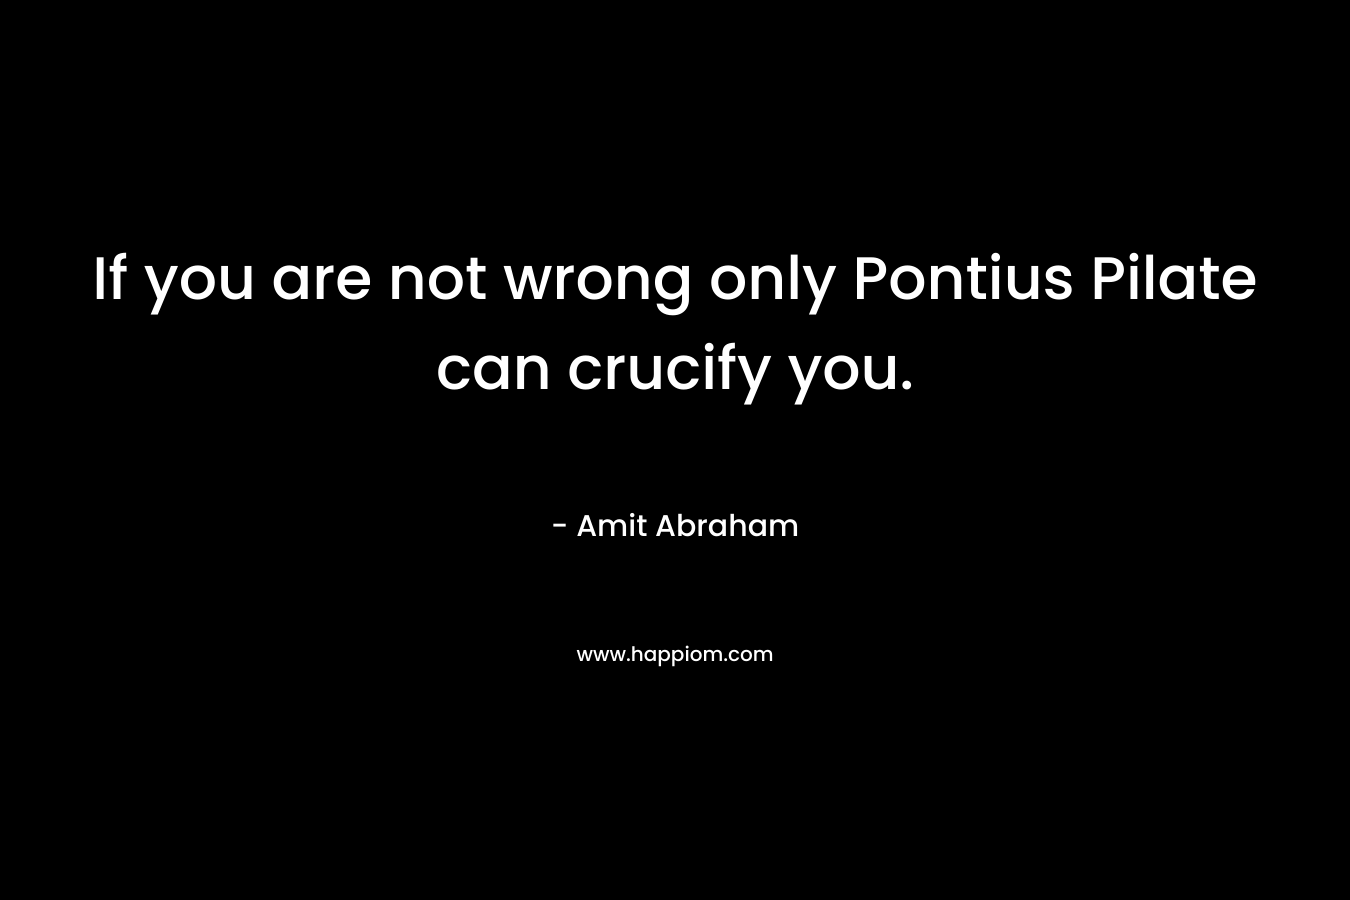 If you are not wrong only Pontius Pilate can crucify you. – Amit Abraham